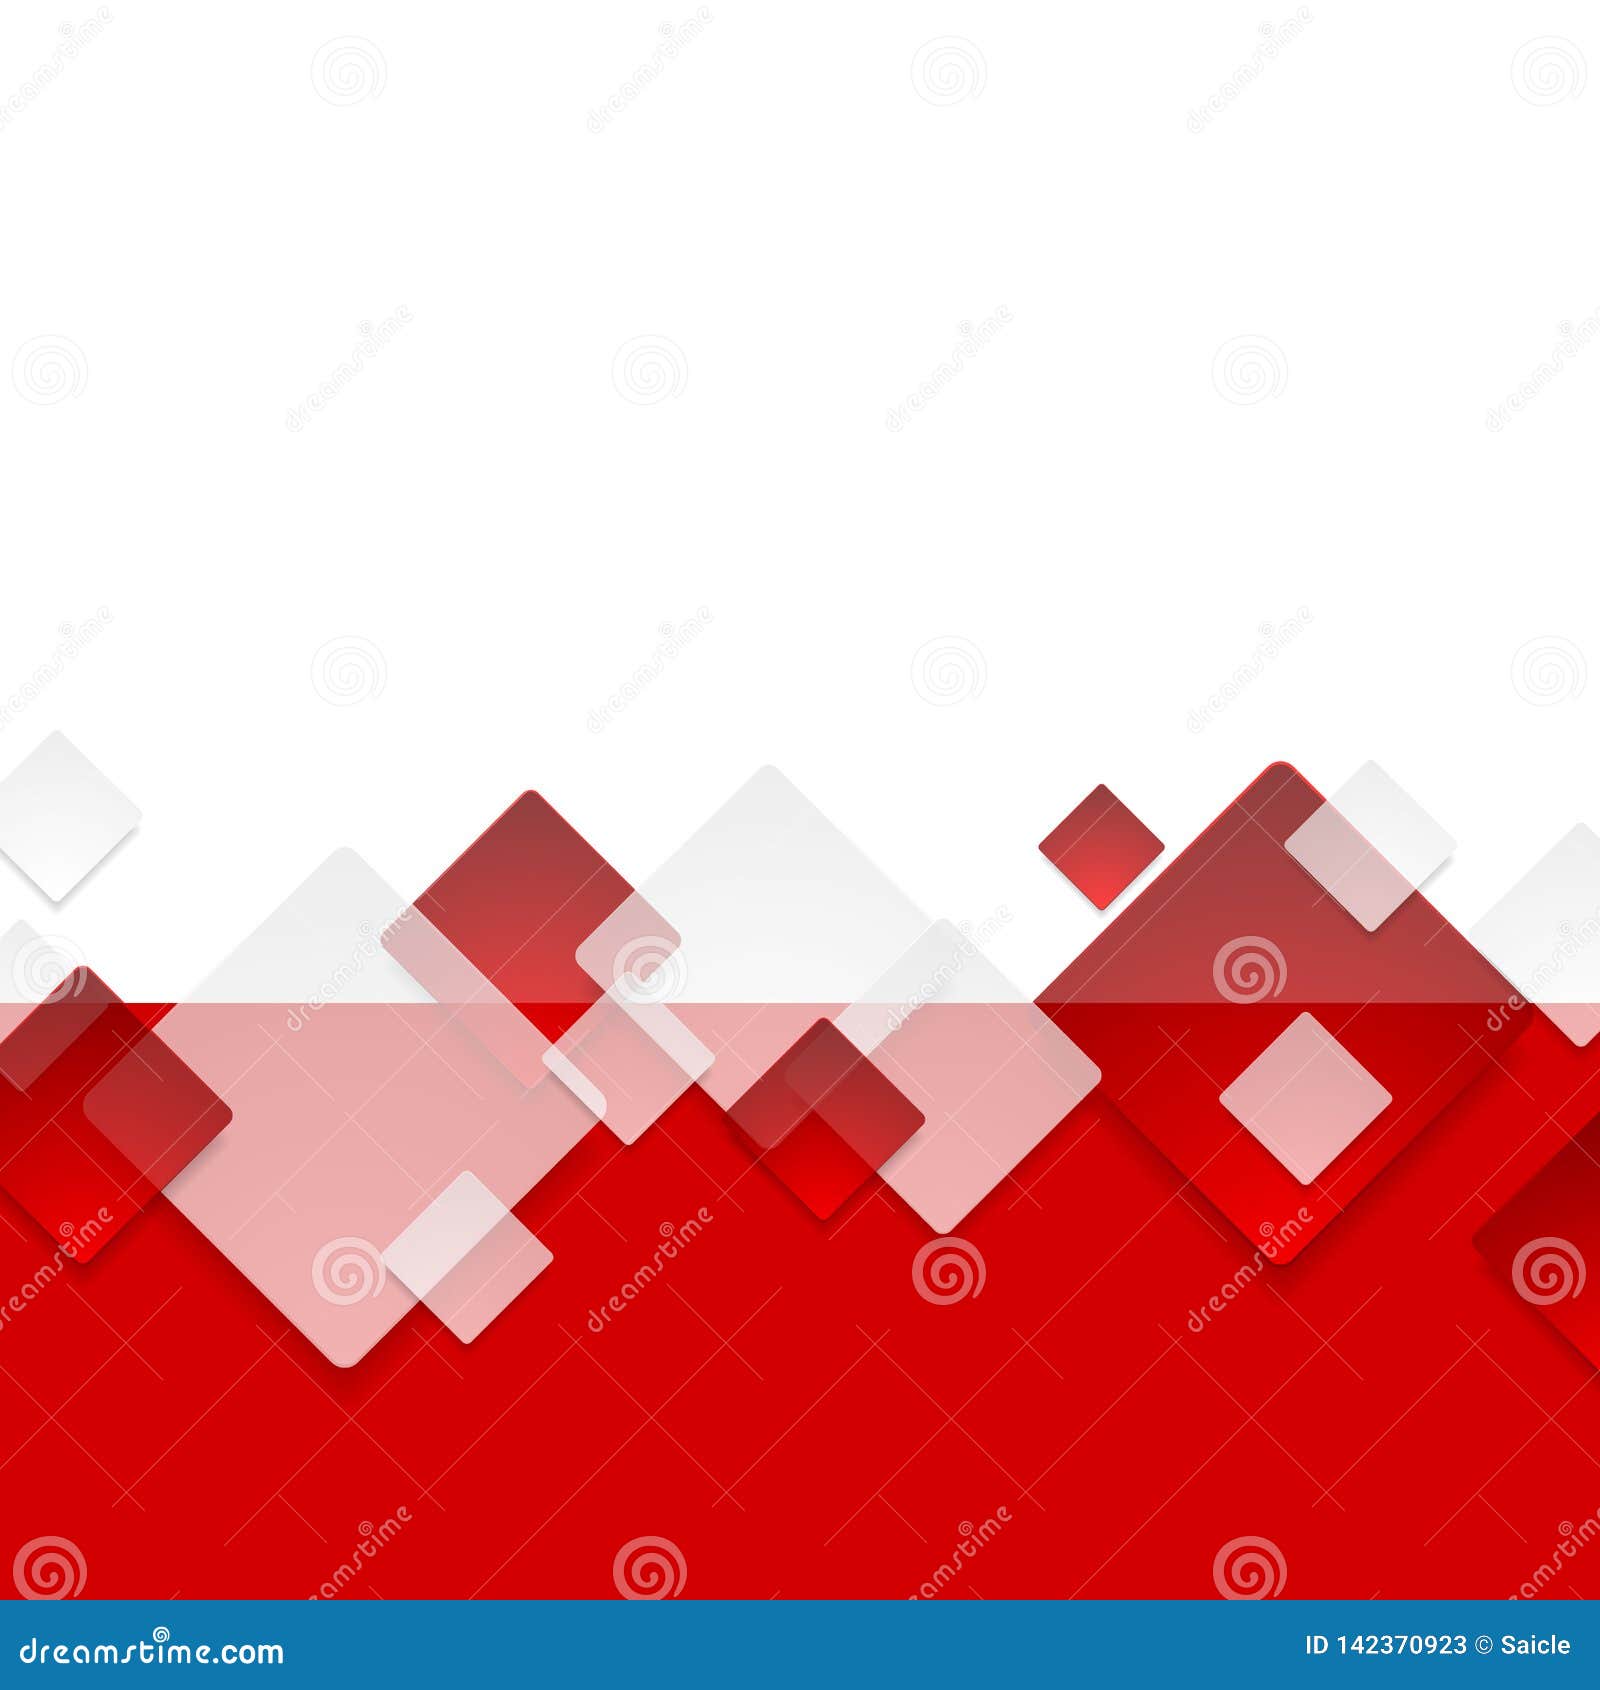 Red and White Geometric Squares Abstract Background Stock Vector -  Illustration of digital, layout: 142370923